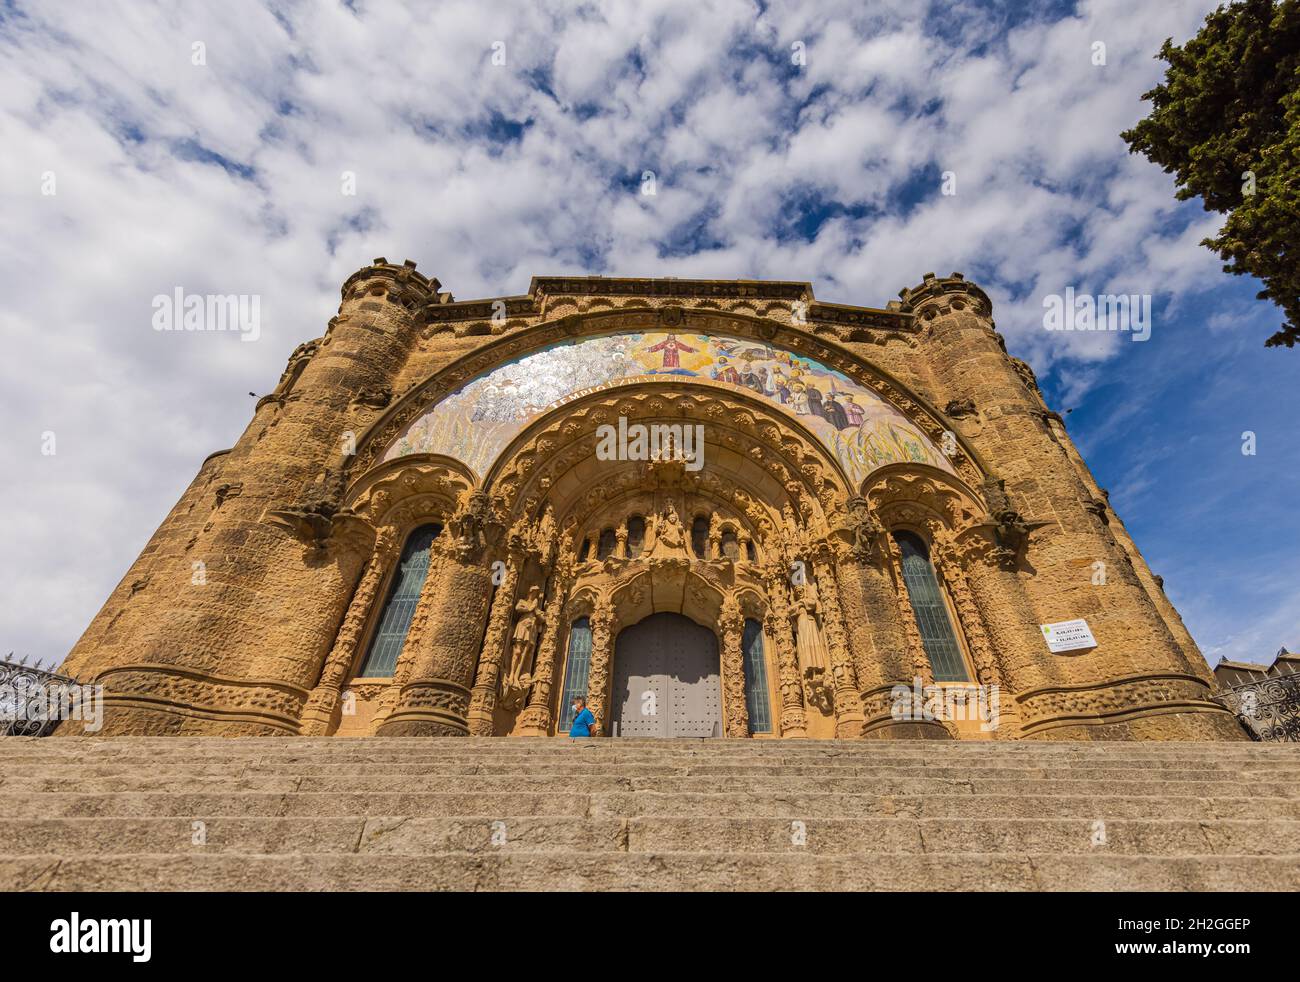 Barcelona, Spain - September 22, 2021: Wide angle capture of the entrance of the Temple of the Sacred Heart of Jesus at the peak of the Parc Tibidabo. Stock Photo